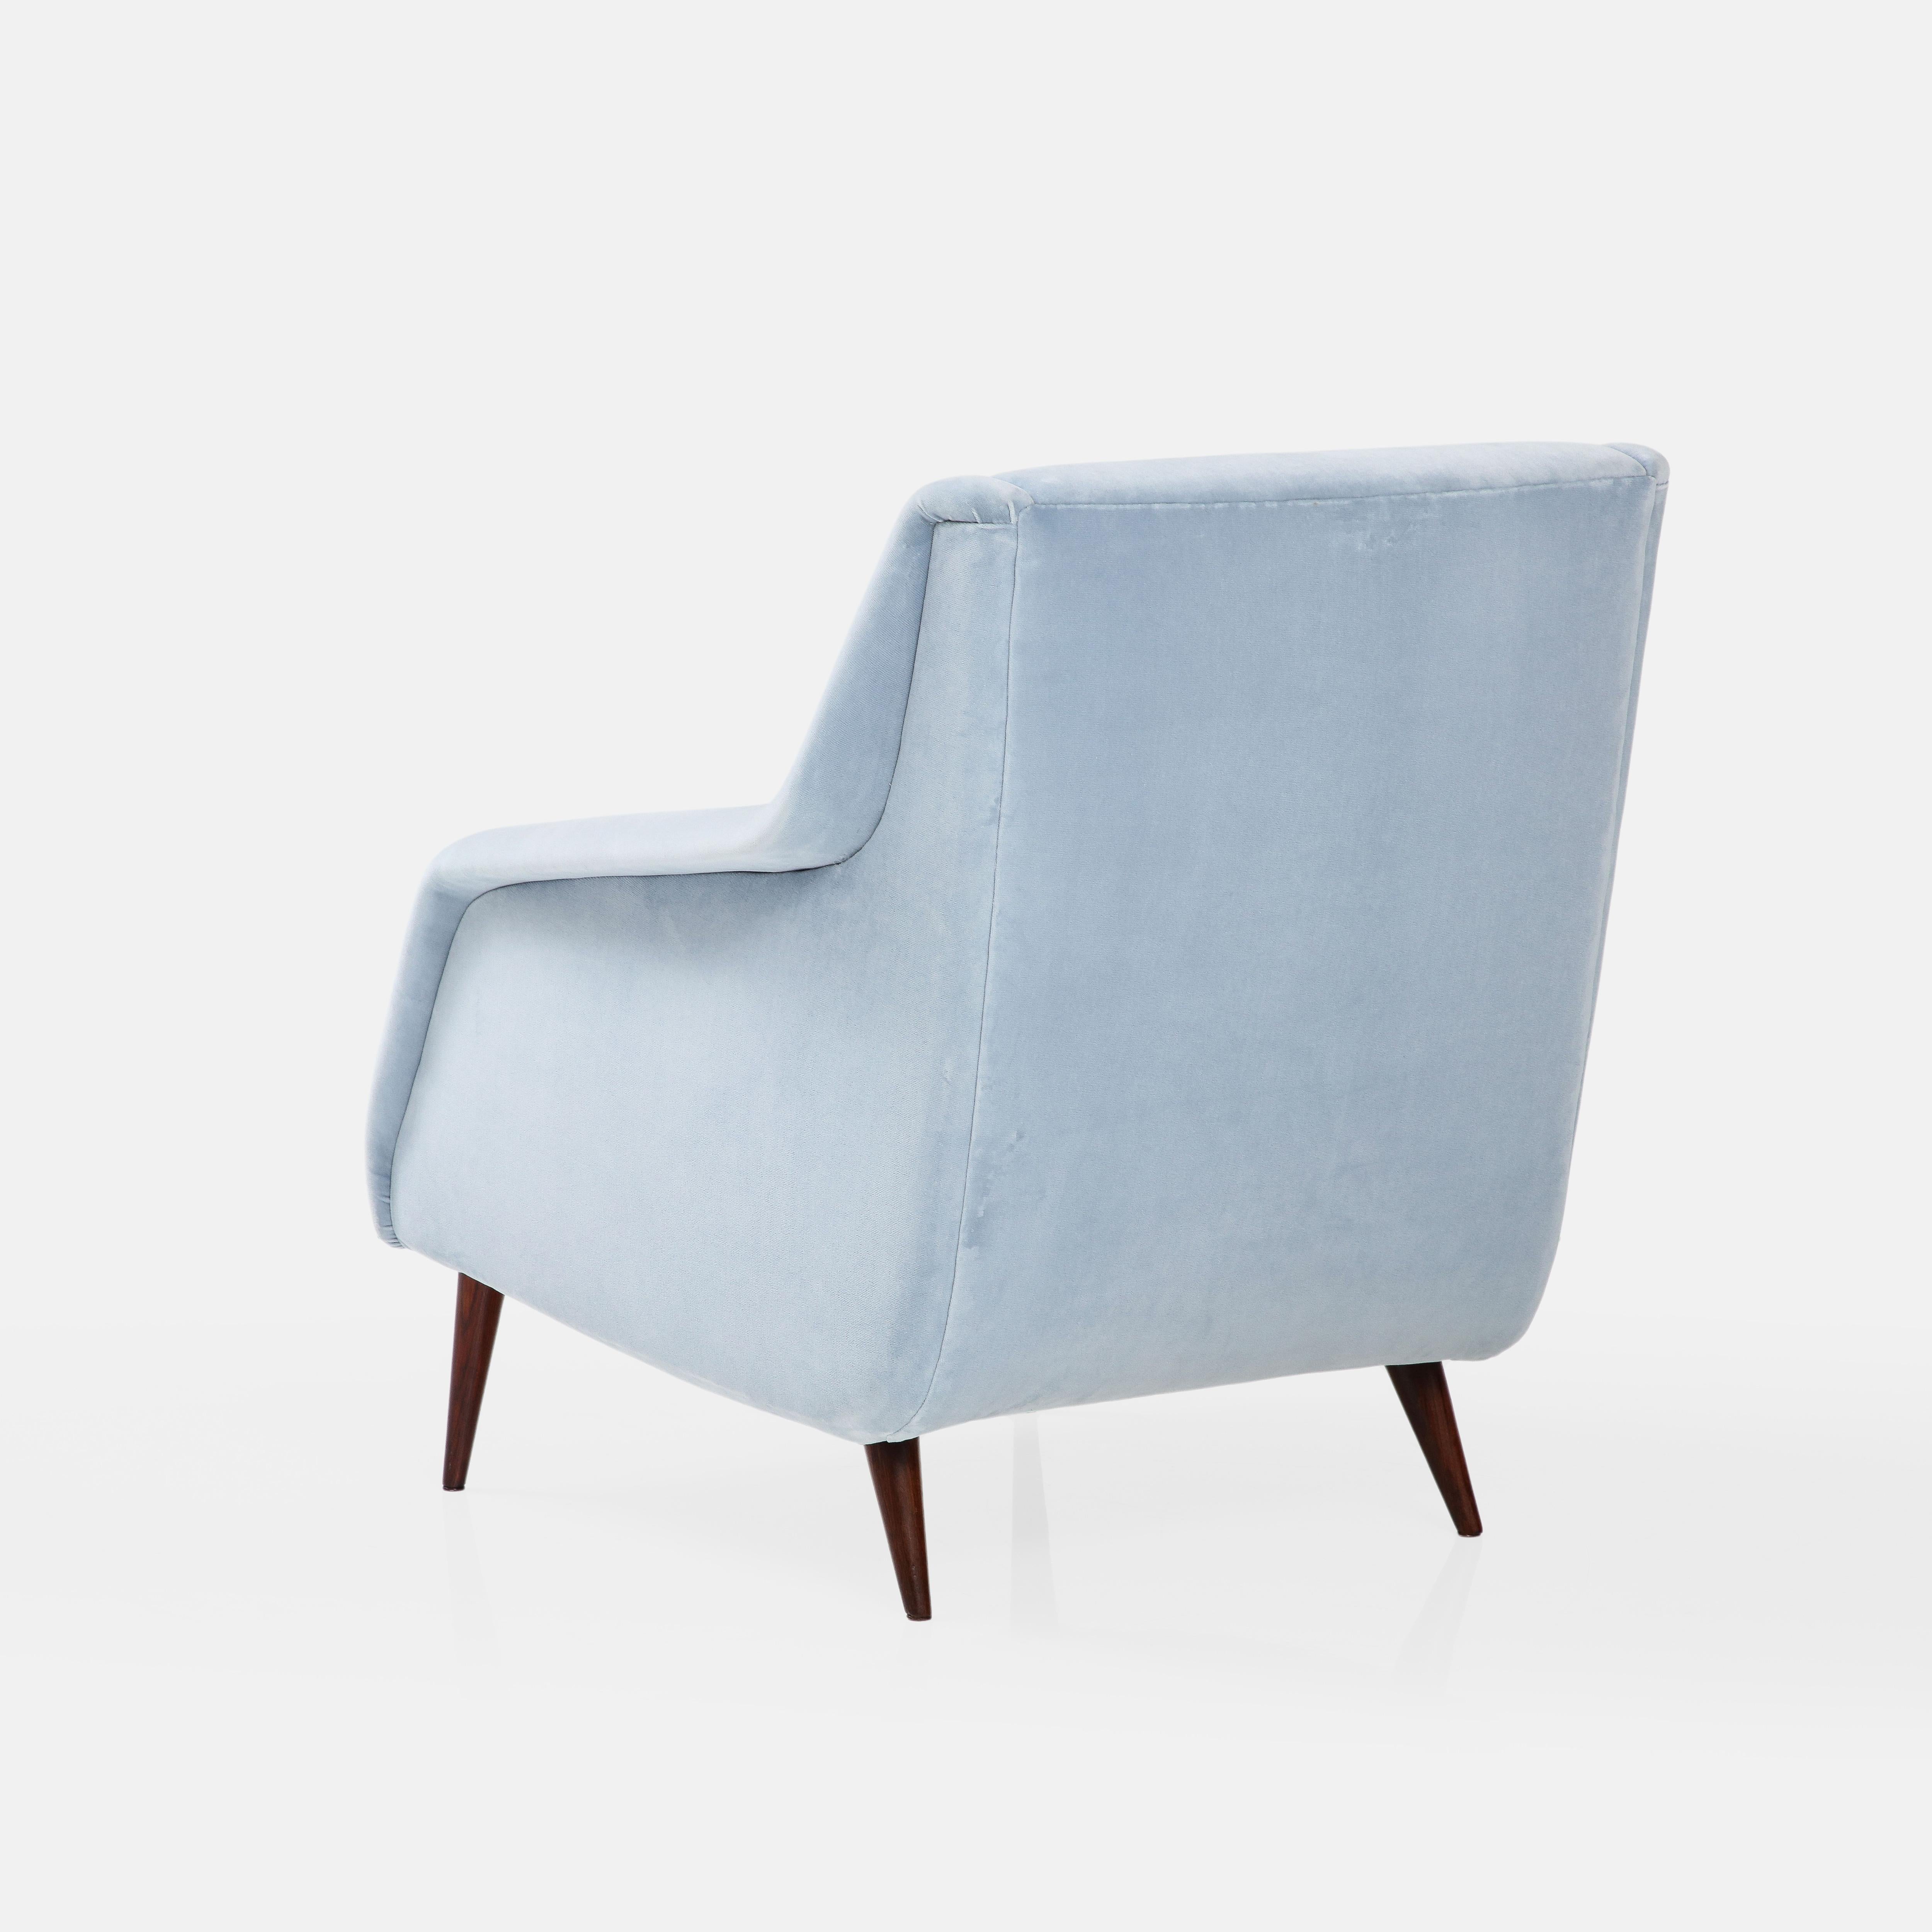 Carlo De Carli for Cassina sculptural lounge chair or armchair in light blue velvet upholstery with stained wood legs. These armchairs are an iconic 1st edition Carlo De Carli design with sleek architectural lines and great proportions for